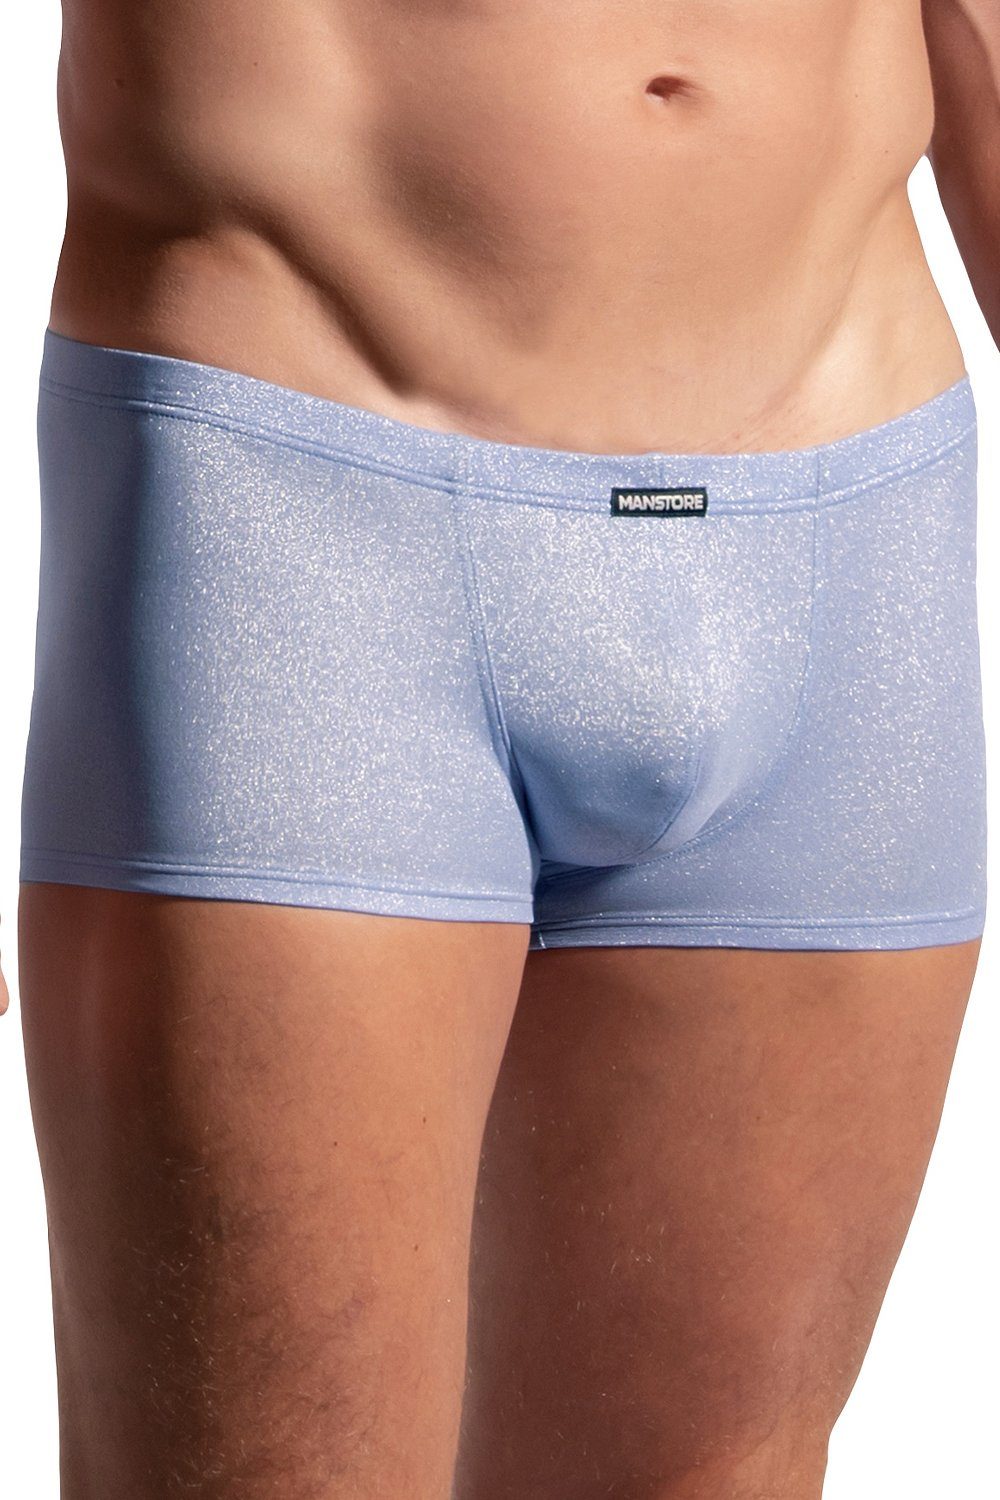 MANSTORE Hipster Micro Pants 212203